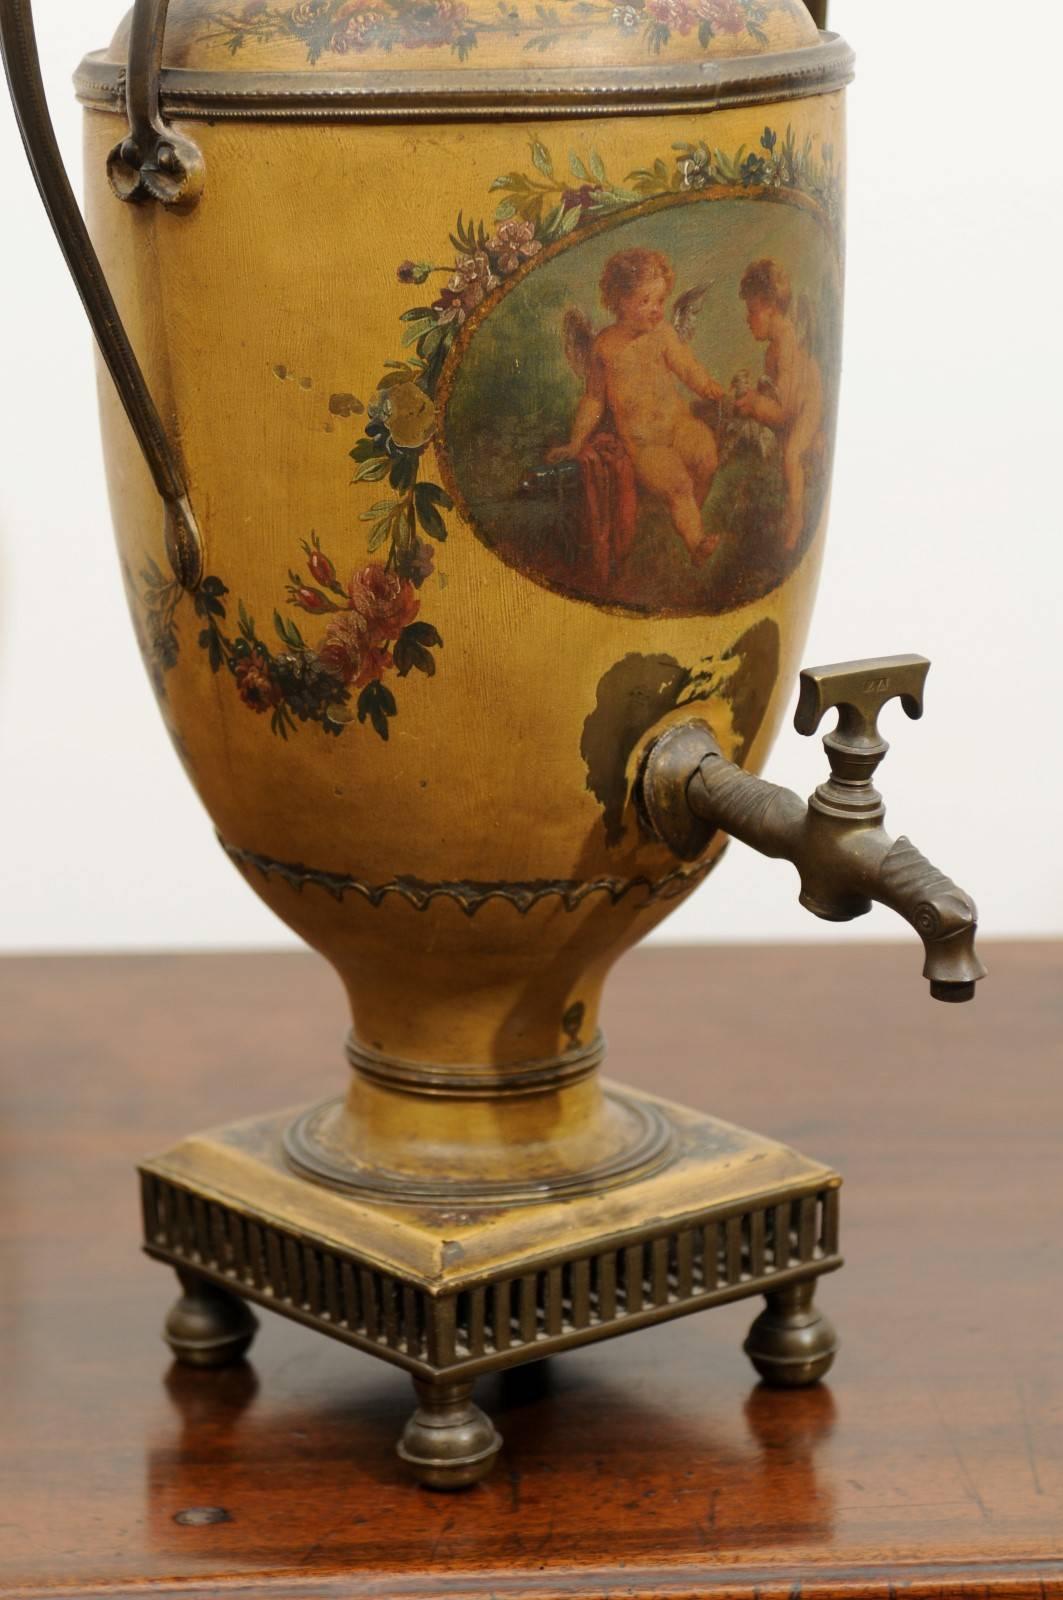 A French, 19th century painted tole coffee pot with cherub décor, scrolled handles and finial covered lid. This French painted tole coffee pot features a tall floral painted lid, topped with an urn-shaped finial. Two large scrolled handles allow the